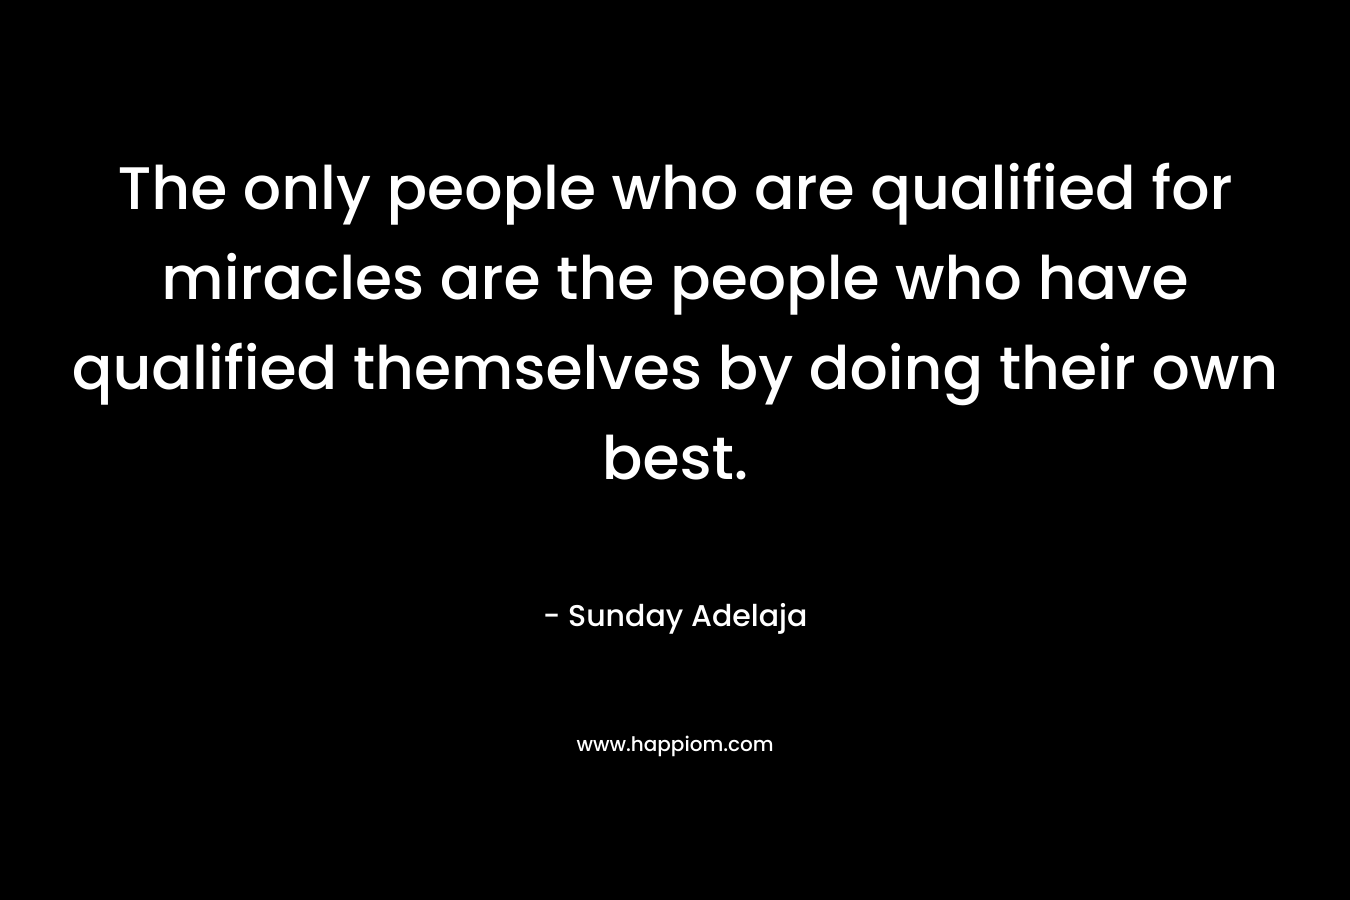 The only people who are qualified for miracles are the people who have qualified themselves by doing their own best. – Sunday Adelaja